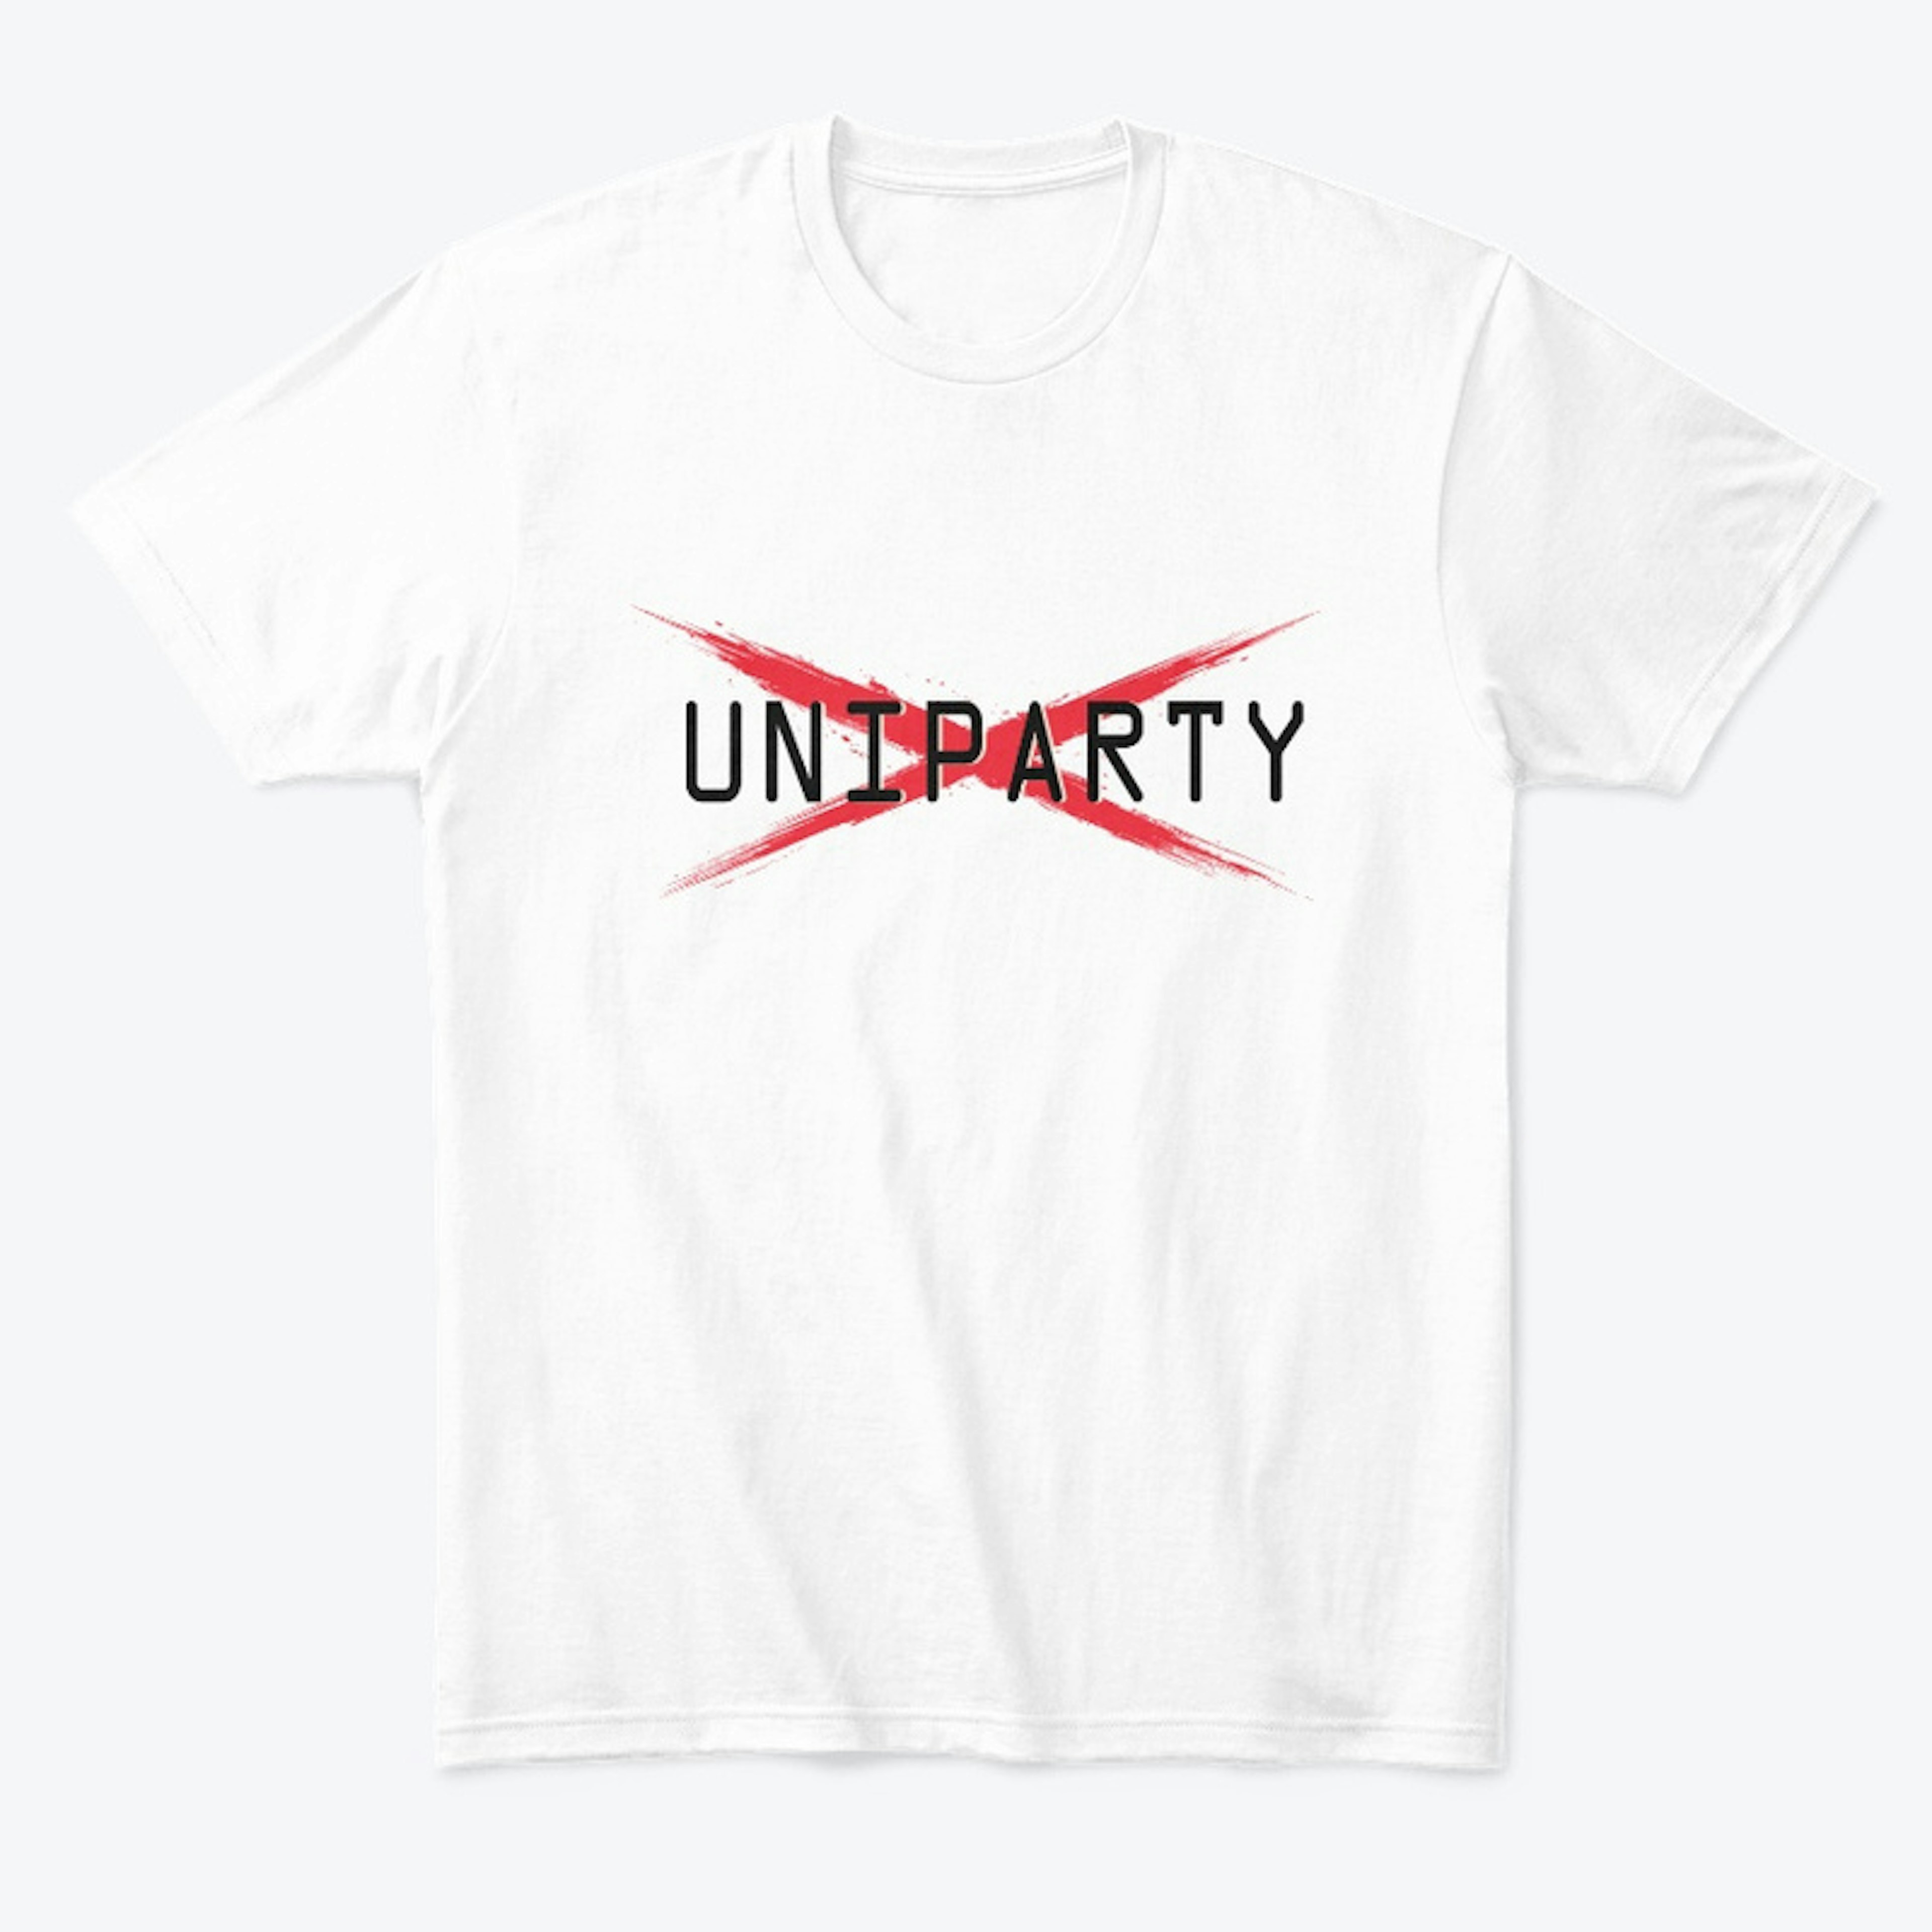 Uniparty2